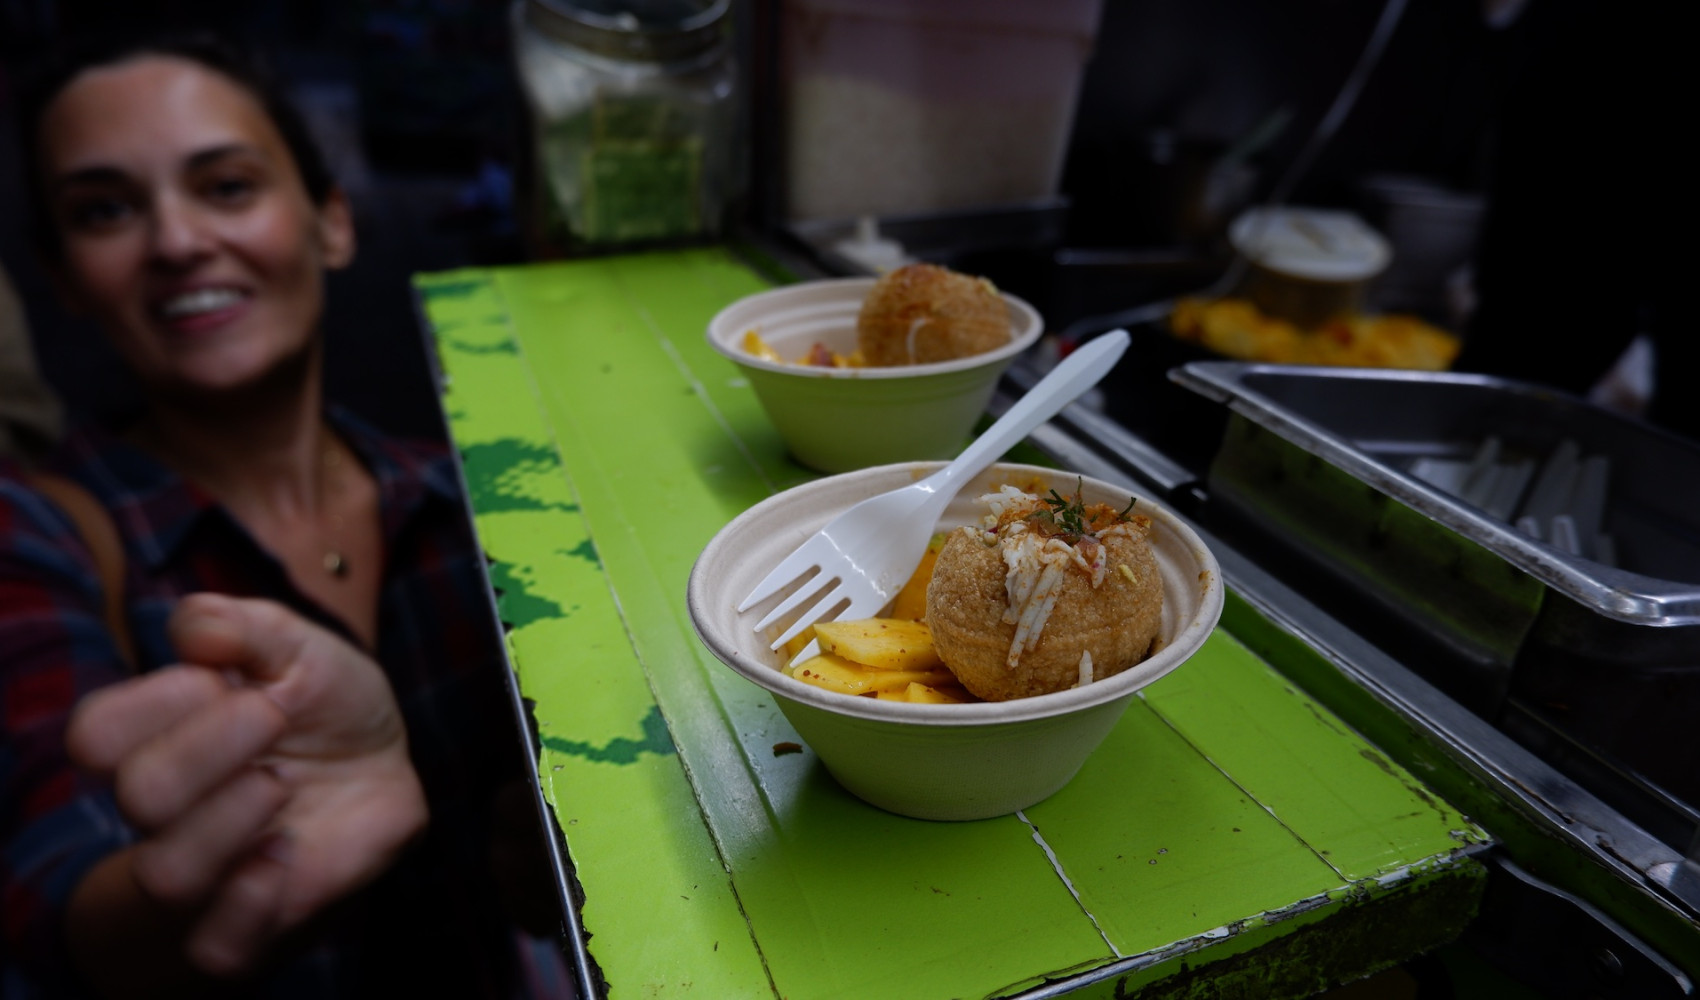 Press Release Turnstile Tours Launches New Street Food Tour Of Jackson